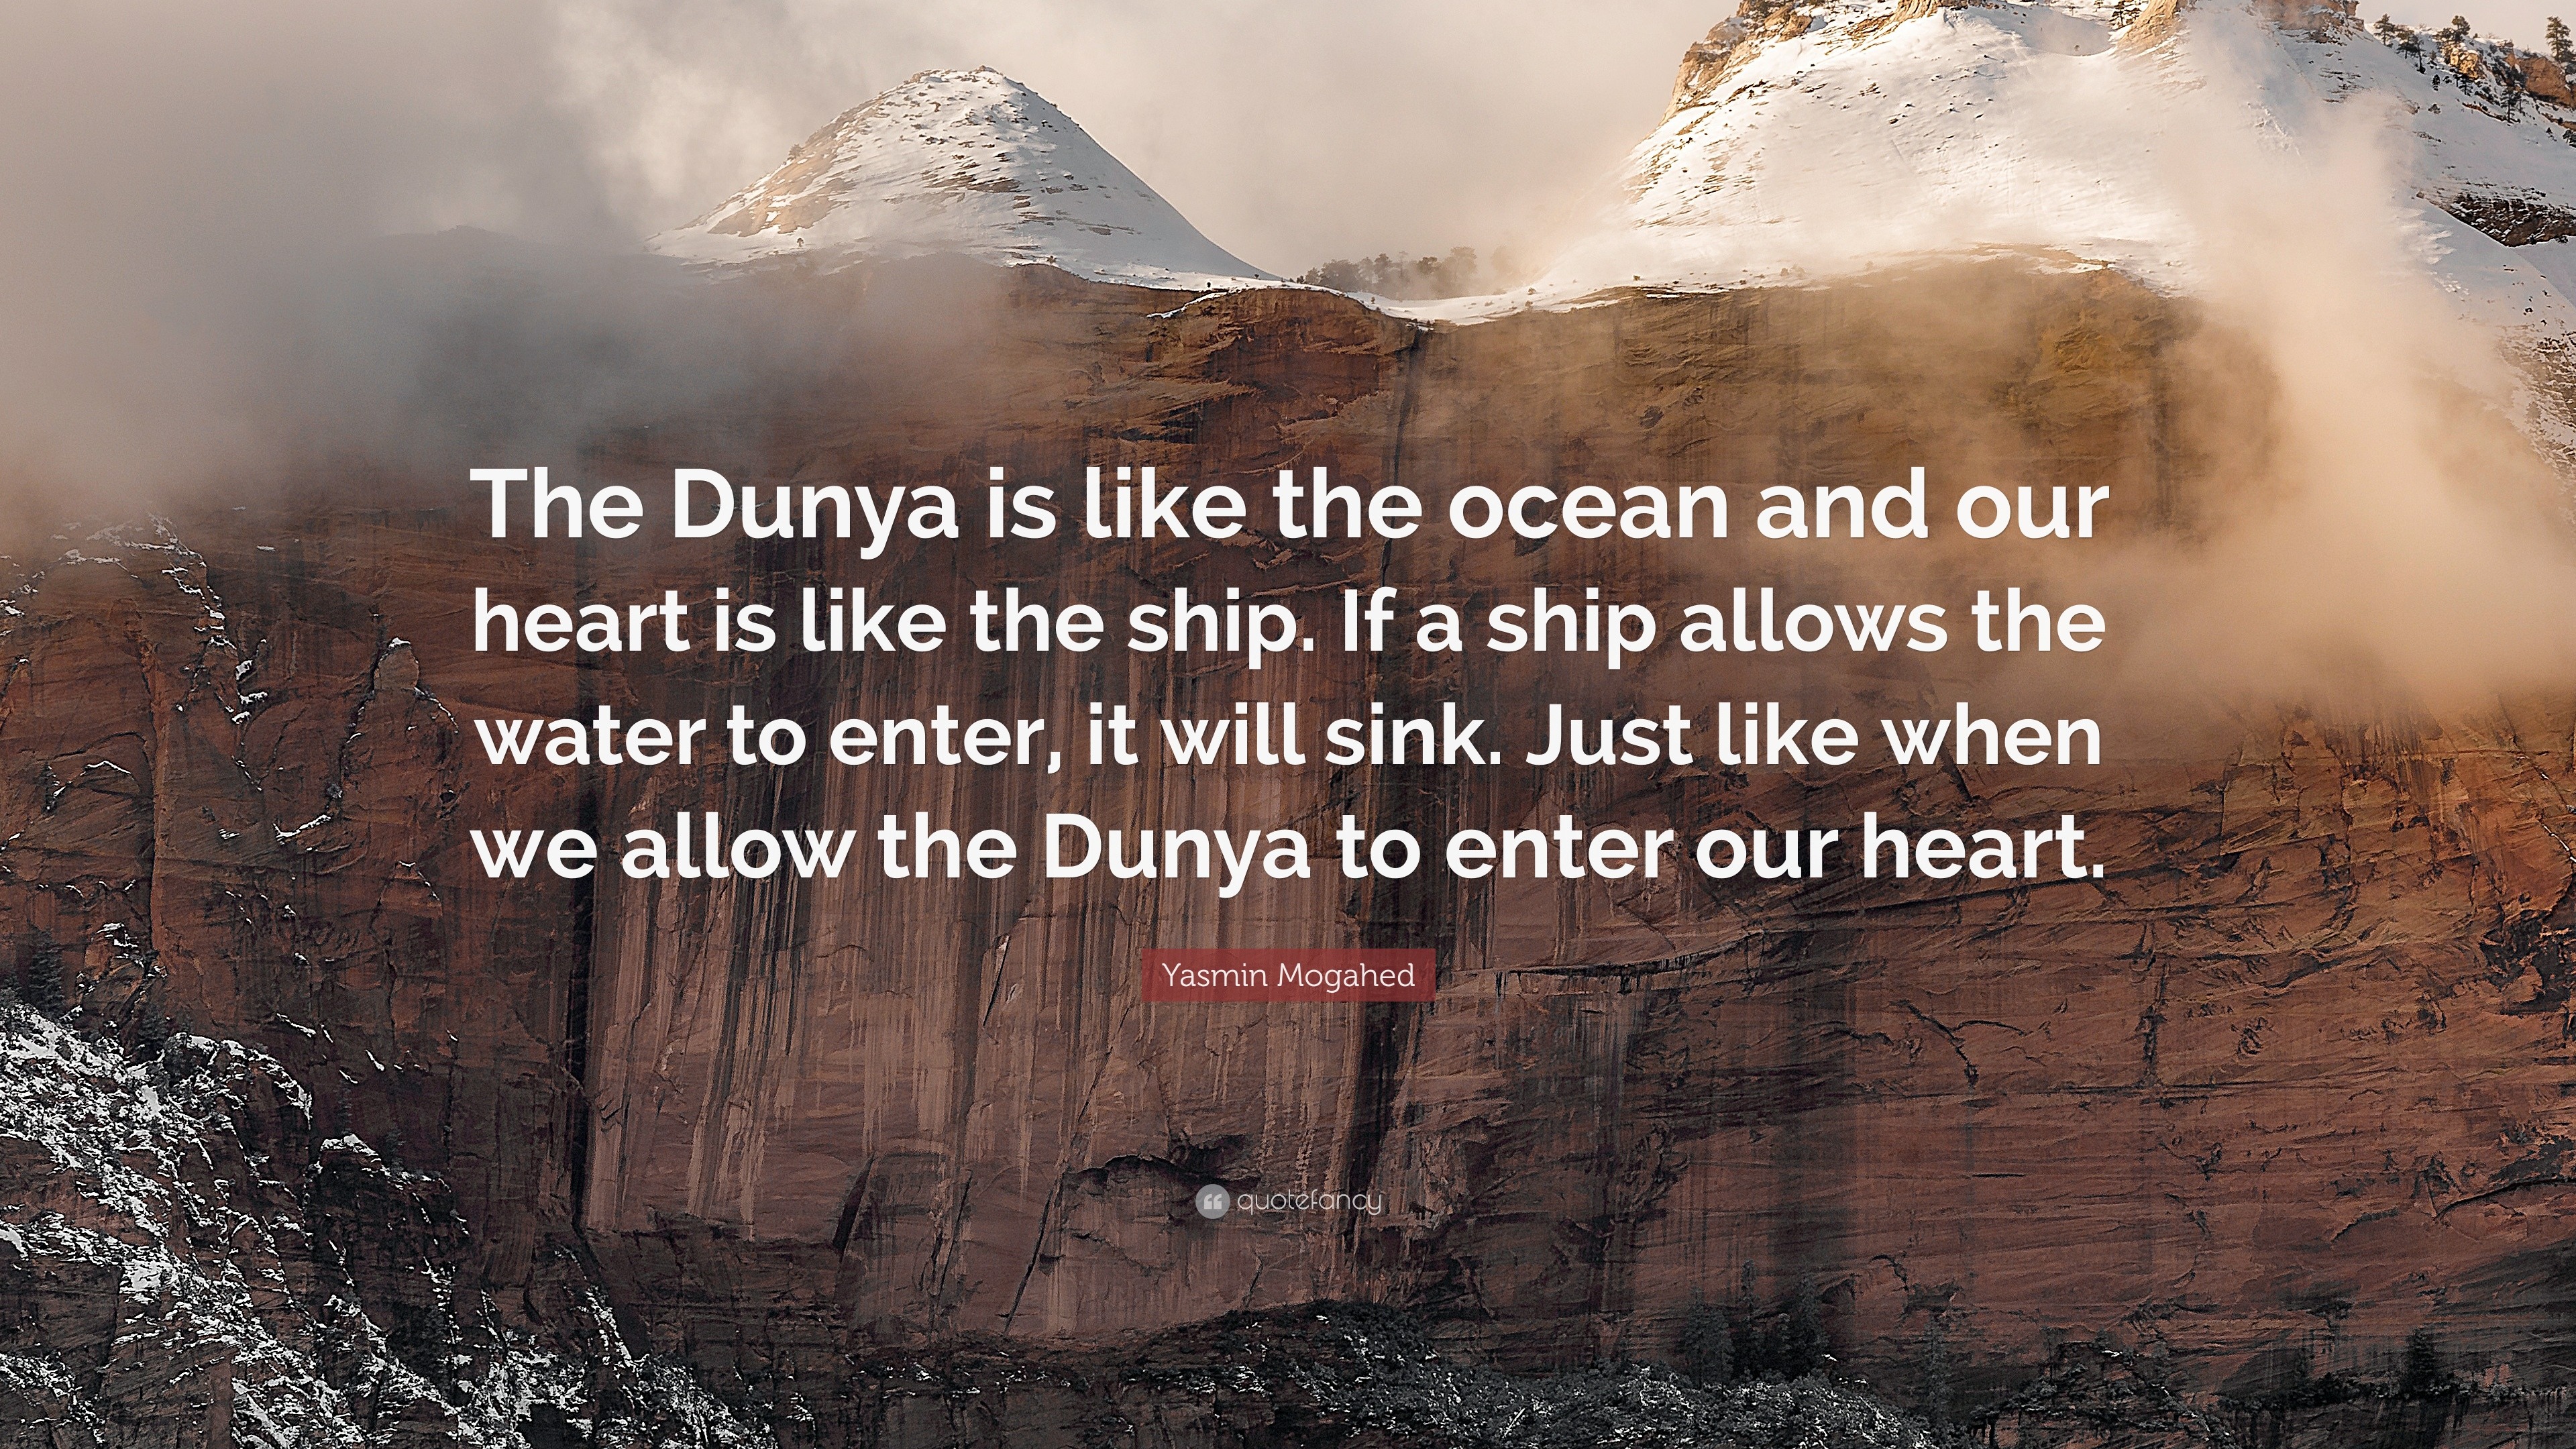 Yasmin Mogahed Quote “The Dunya is like the ocean and our heart is like